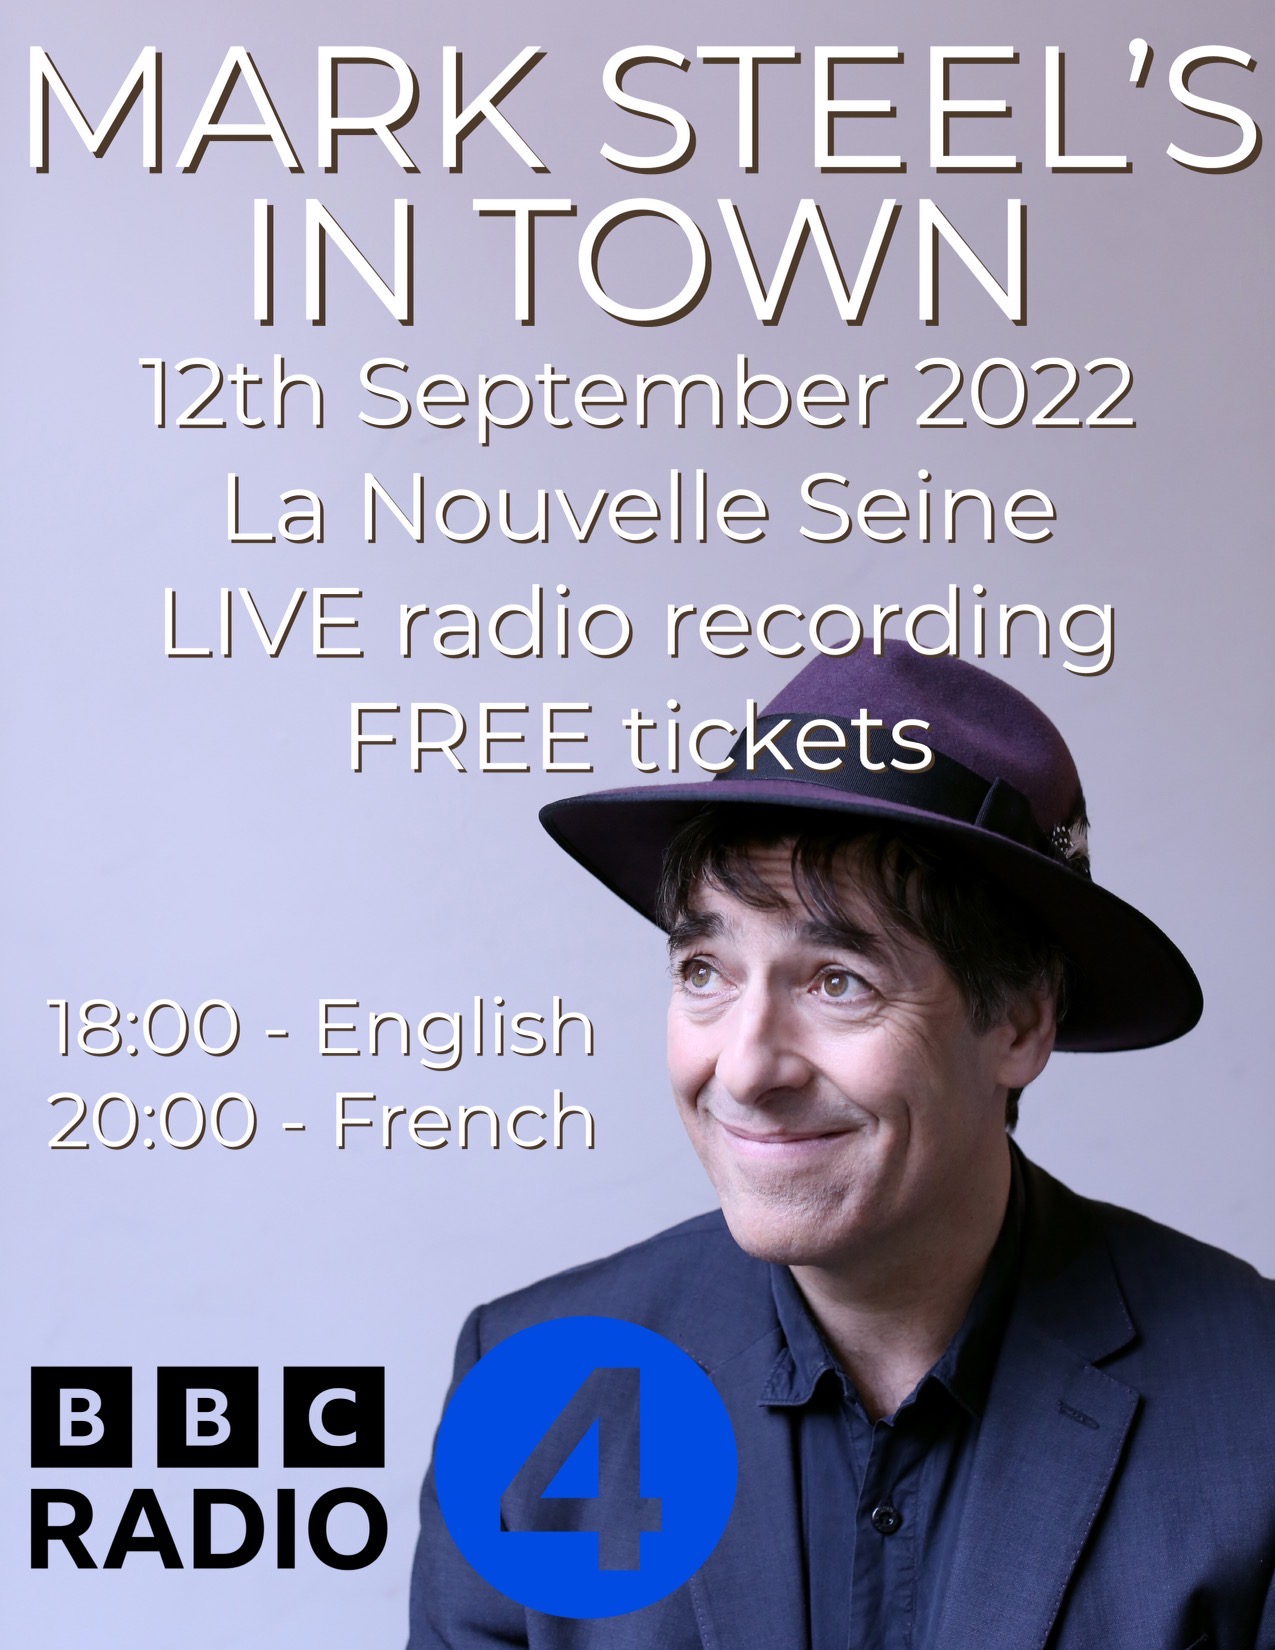 mark steel's in town tour dates